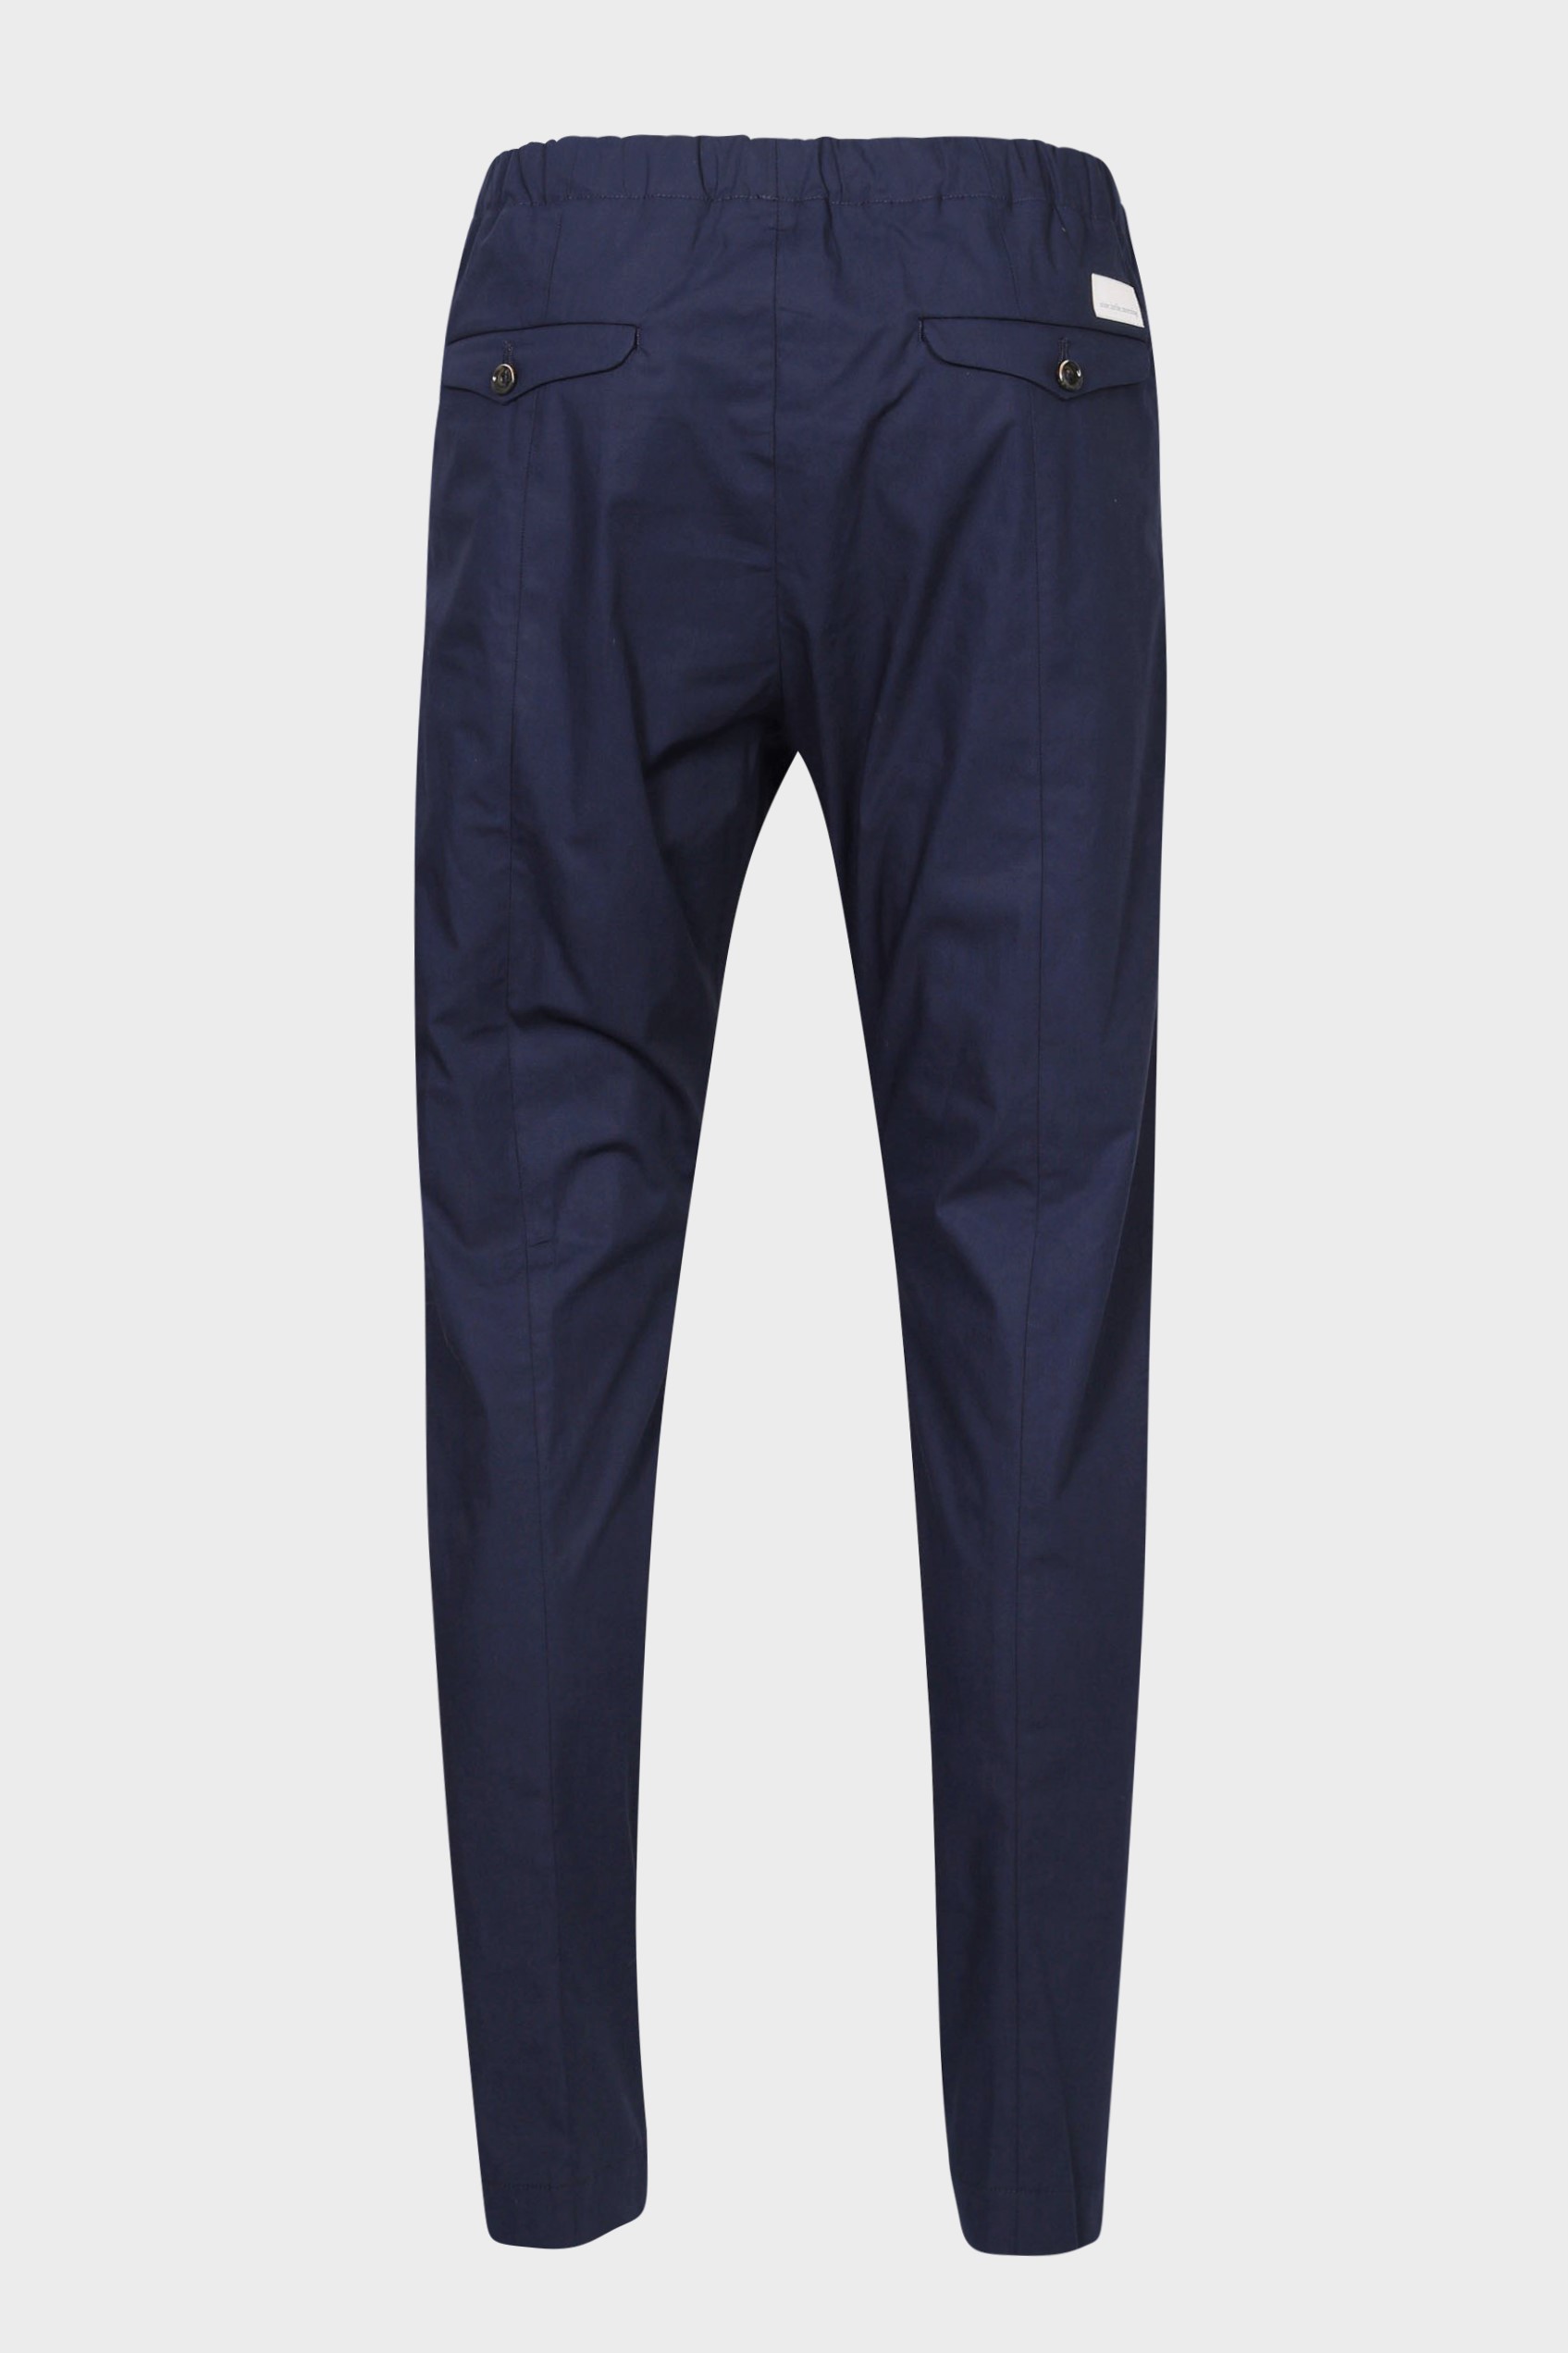 NINE:IN:THE:MORNING Mirko Cotton Stretch Pant Navy Blue